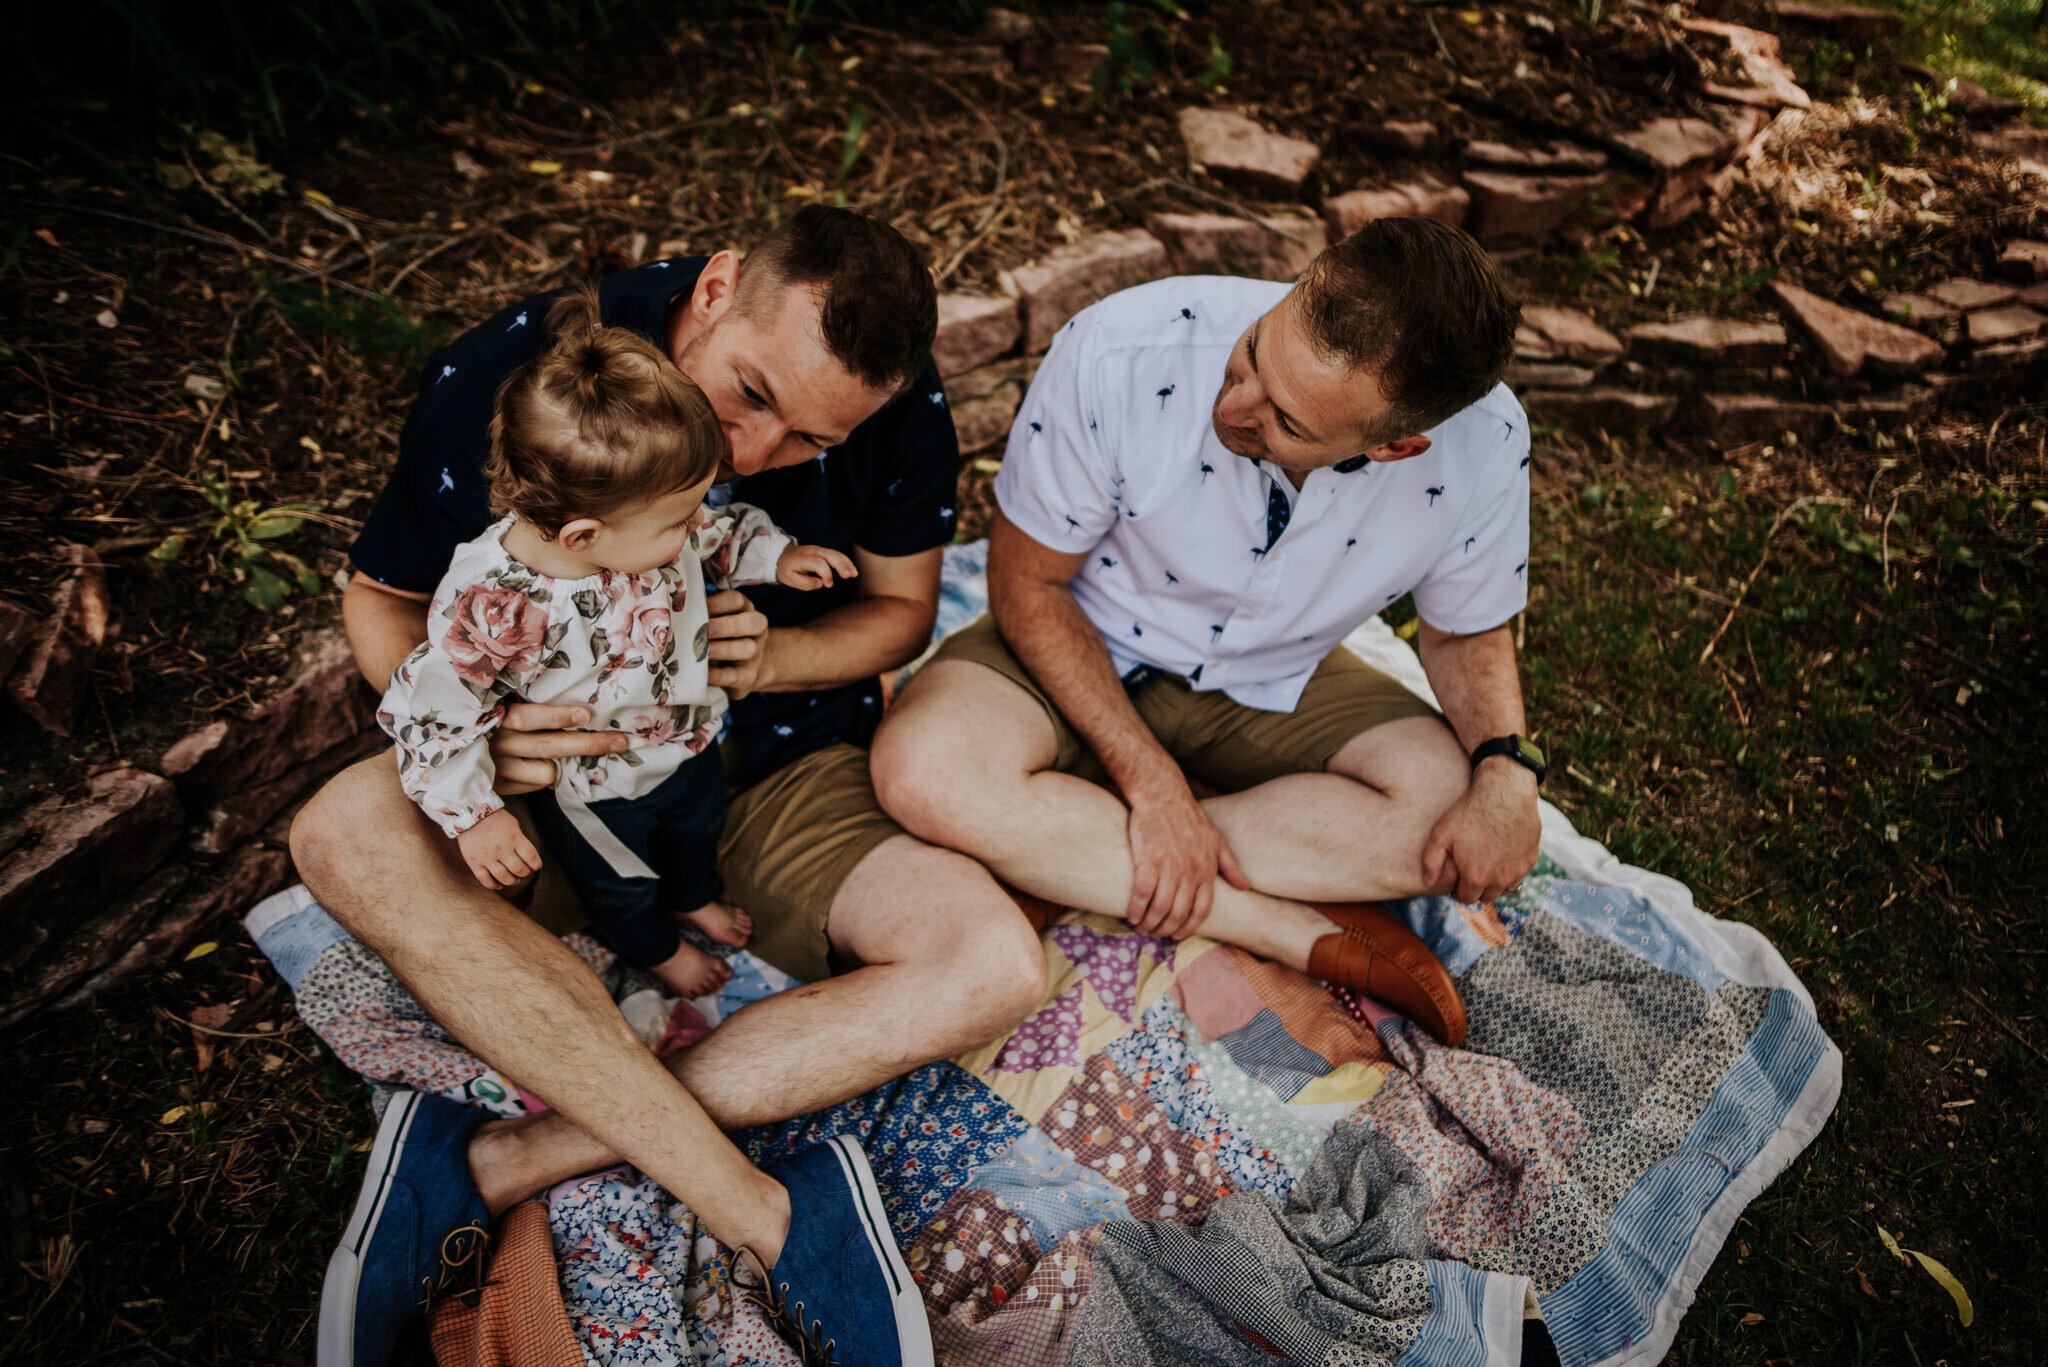 Paul+and+Dave+Gay+Couple+Family+Session+Colorado+Springs+Colorado+LGBTQ+Dads+Daughter+Wild+Prairie+Photography-15-2020.jpeg